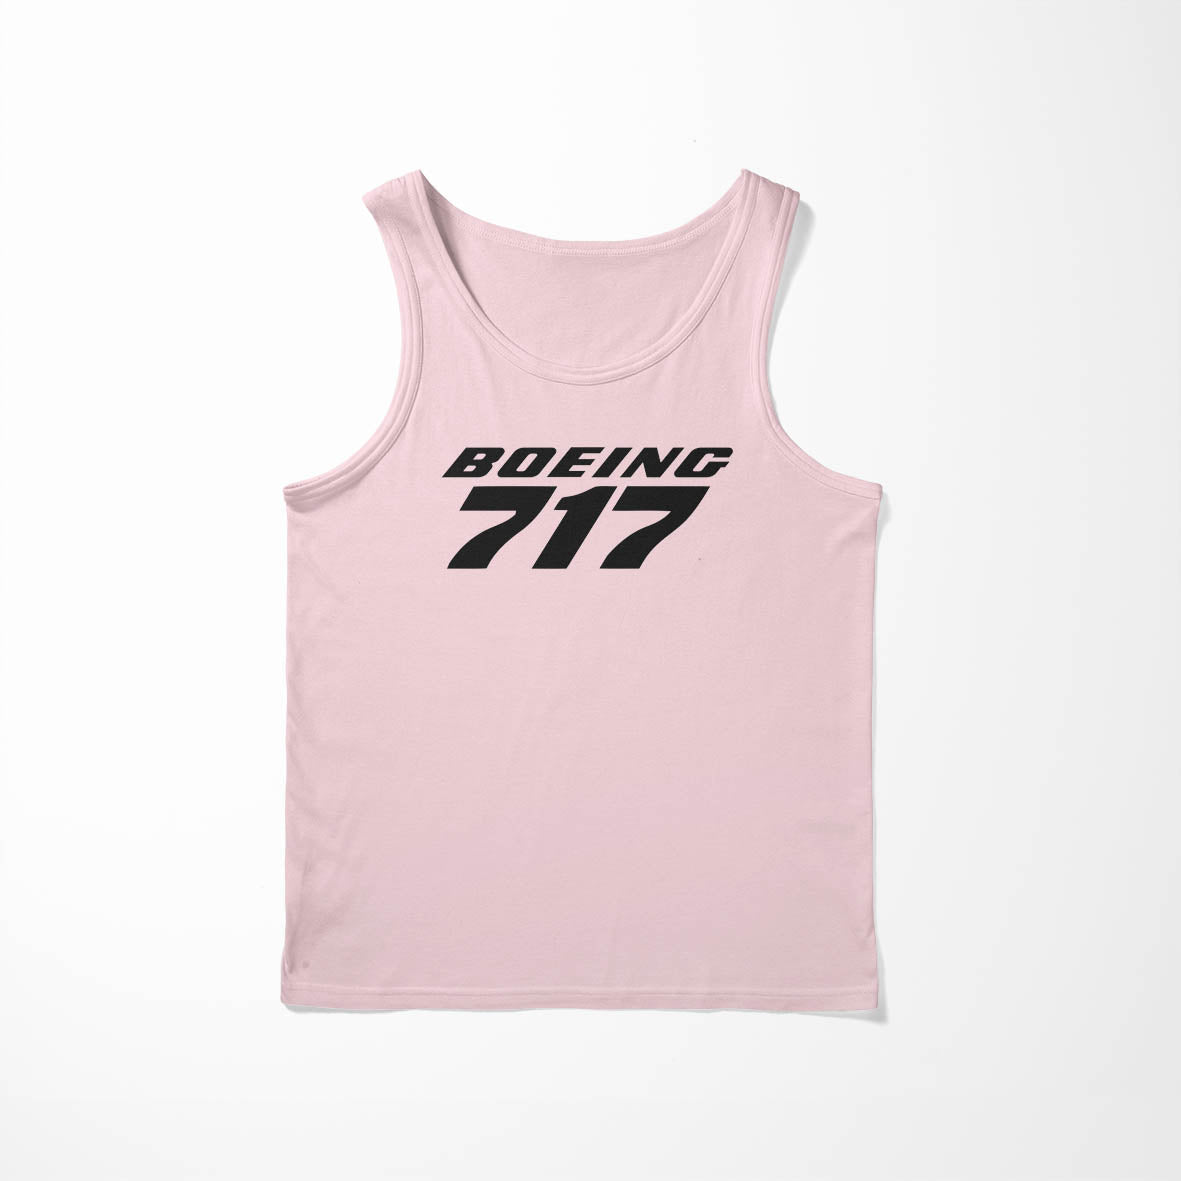 Boeing 717 & Text Designed Tank Tops